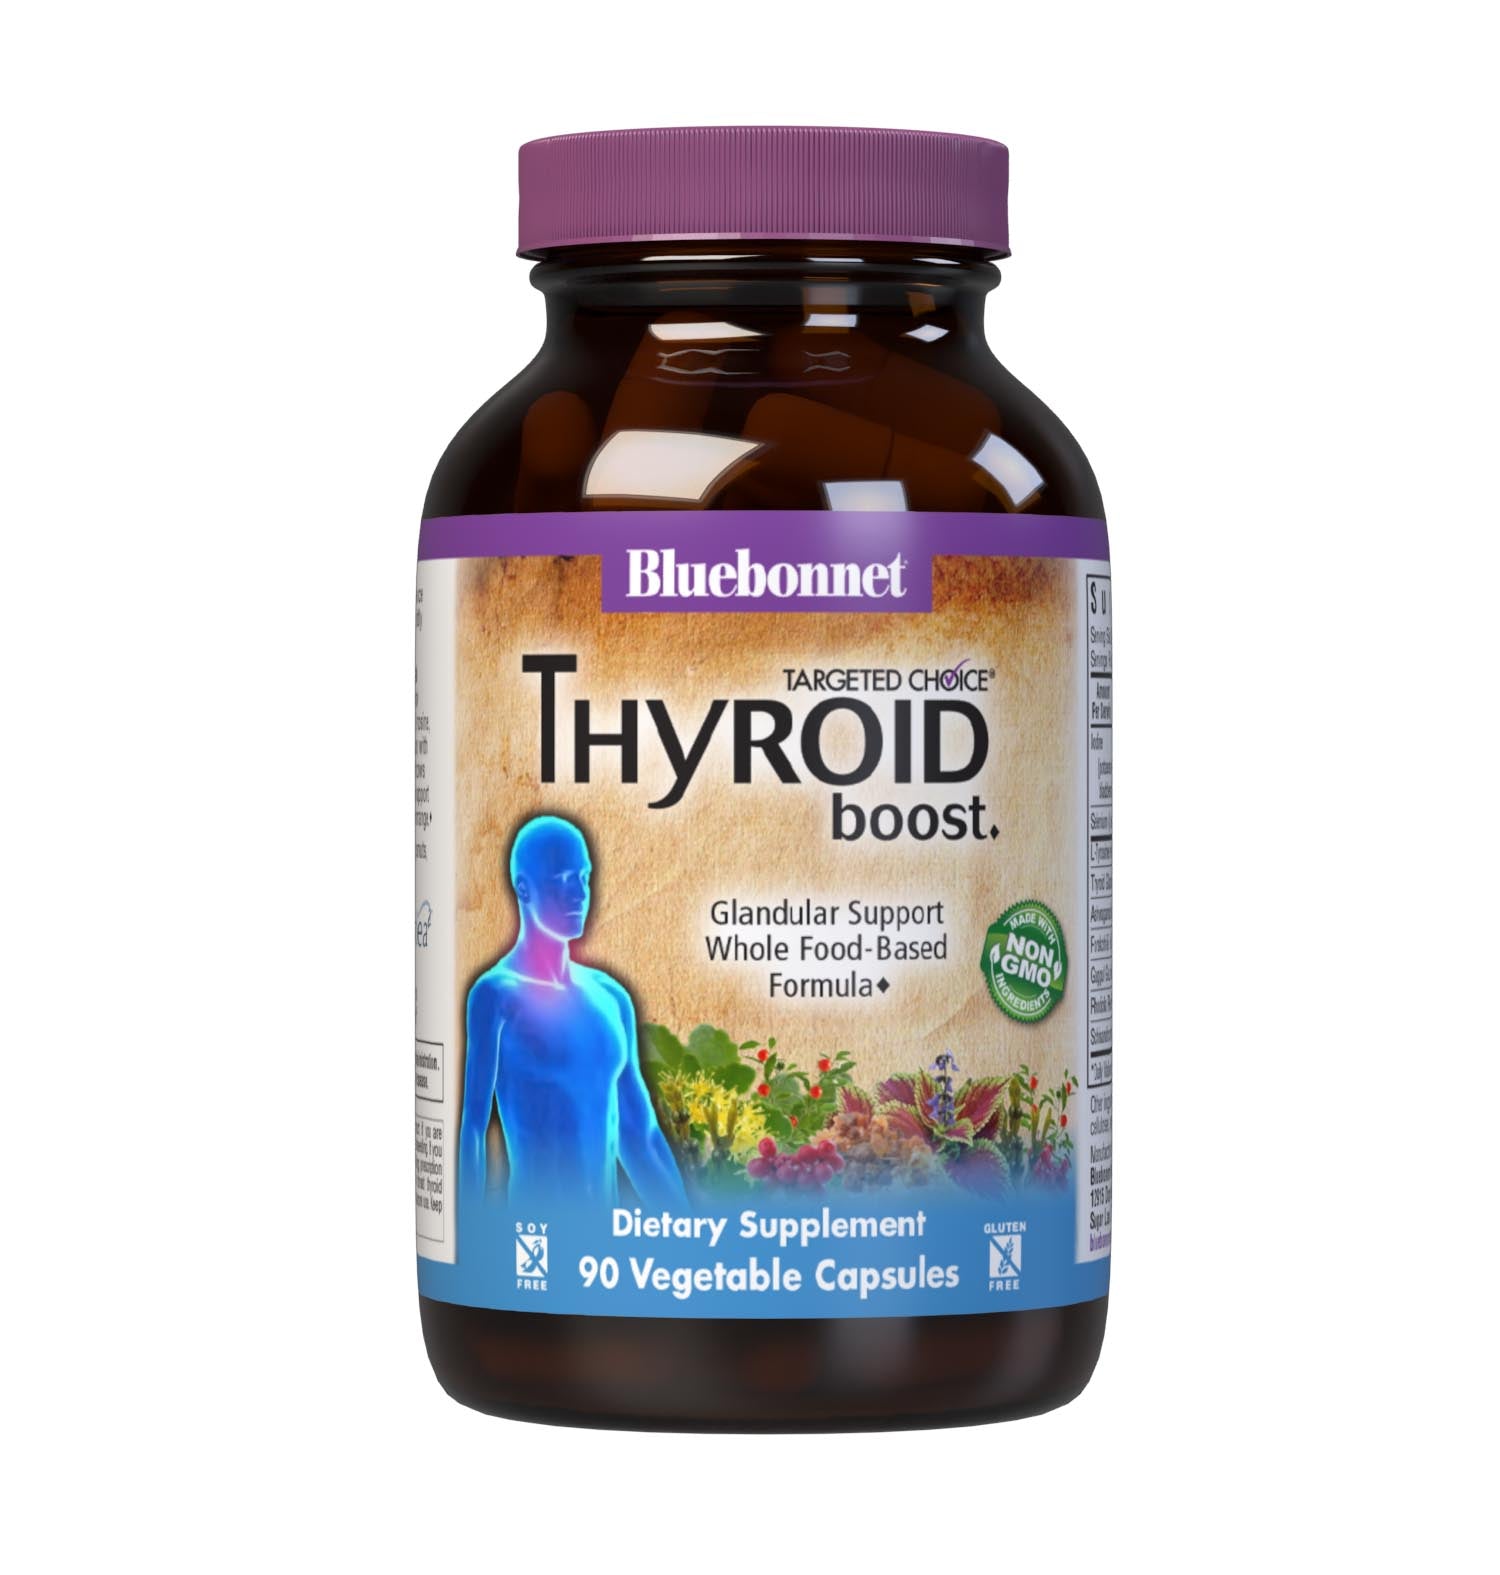 Bluebonnet’s Targeted Choice Thyroid Boost 90 Vegetable Capsules are specially formulated with unique, sustainably harvested or wildcrafted botanical extracts, free-form L-tyrosine, as well as iodine from a proprietary blend of glandular powder, potassium iodide and brown seaweeds to help maintain healthy thyroid hormone levels that are within the normal range. #size_90 count